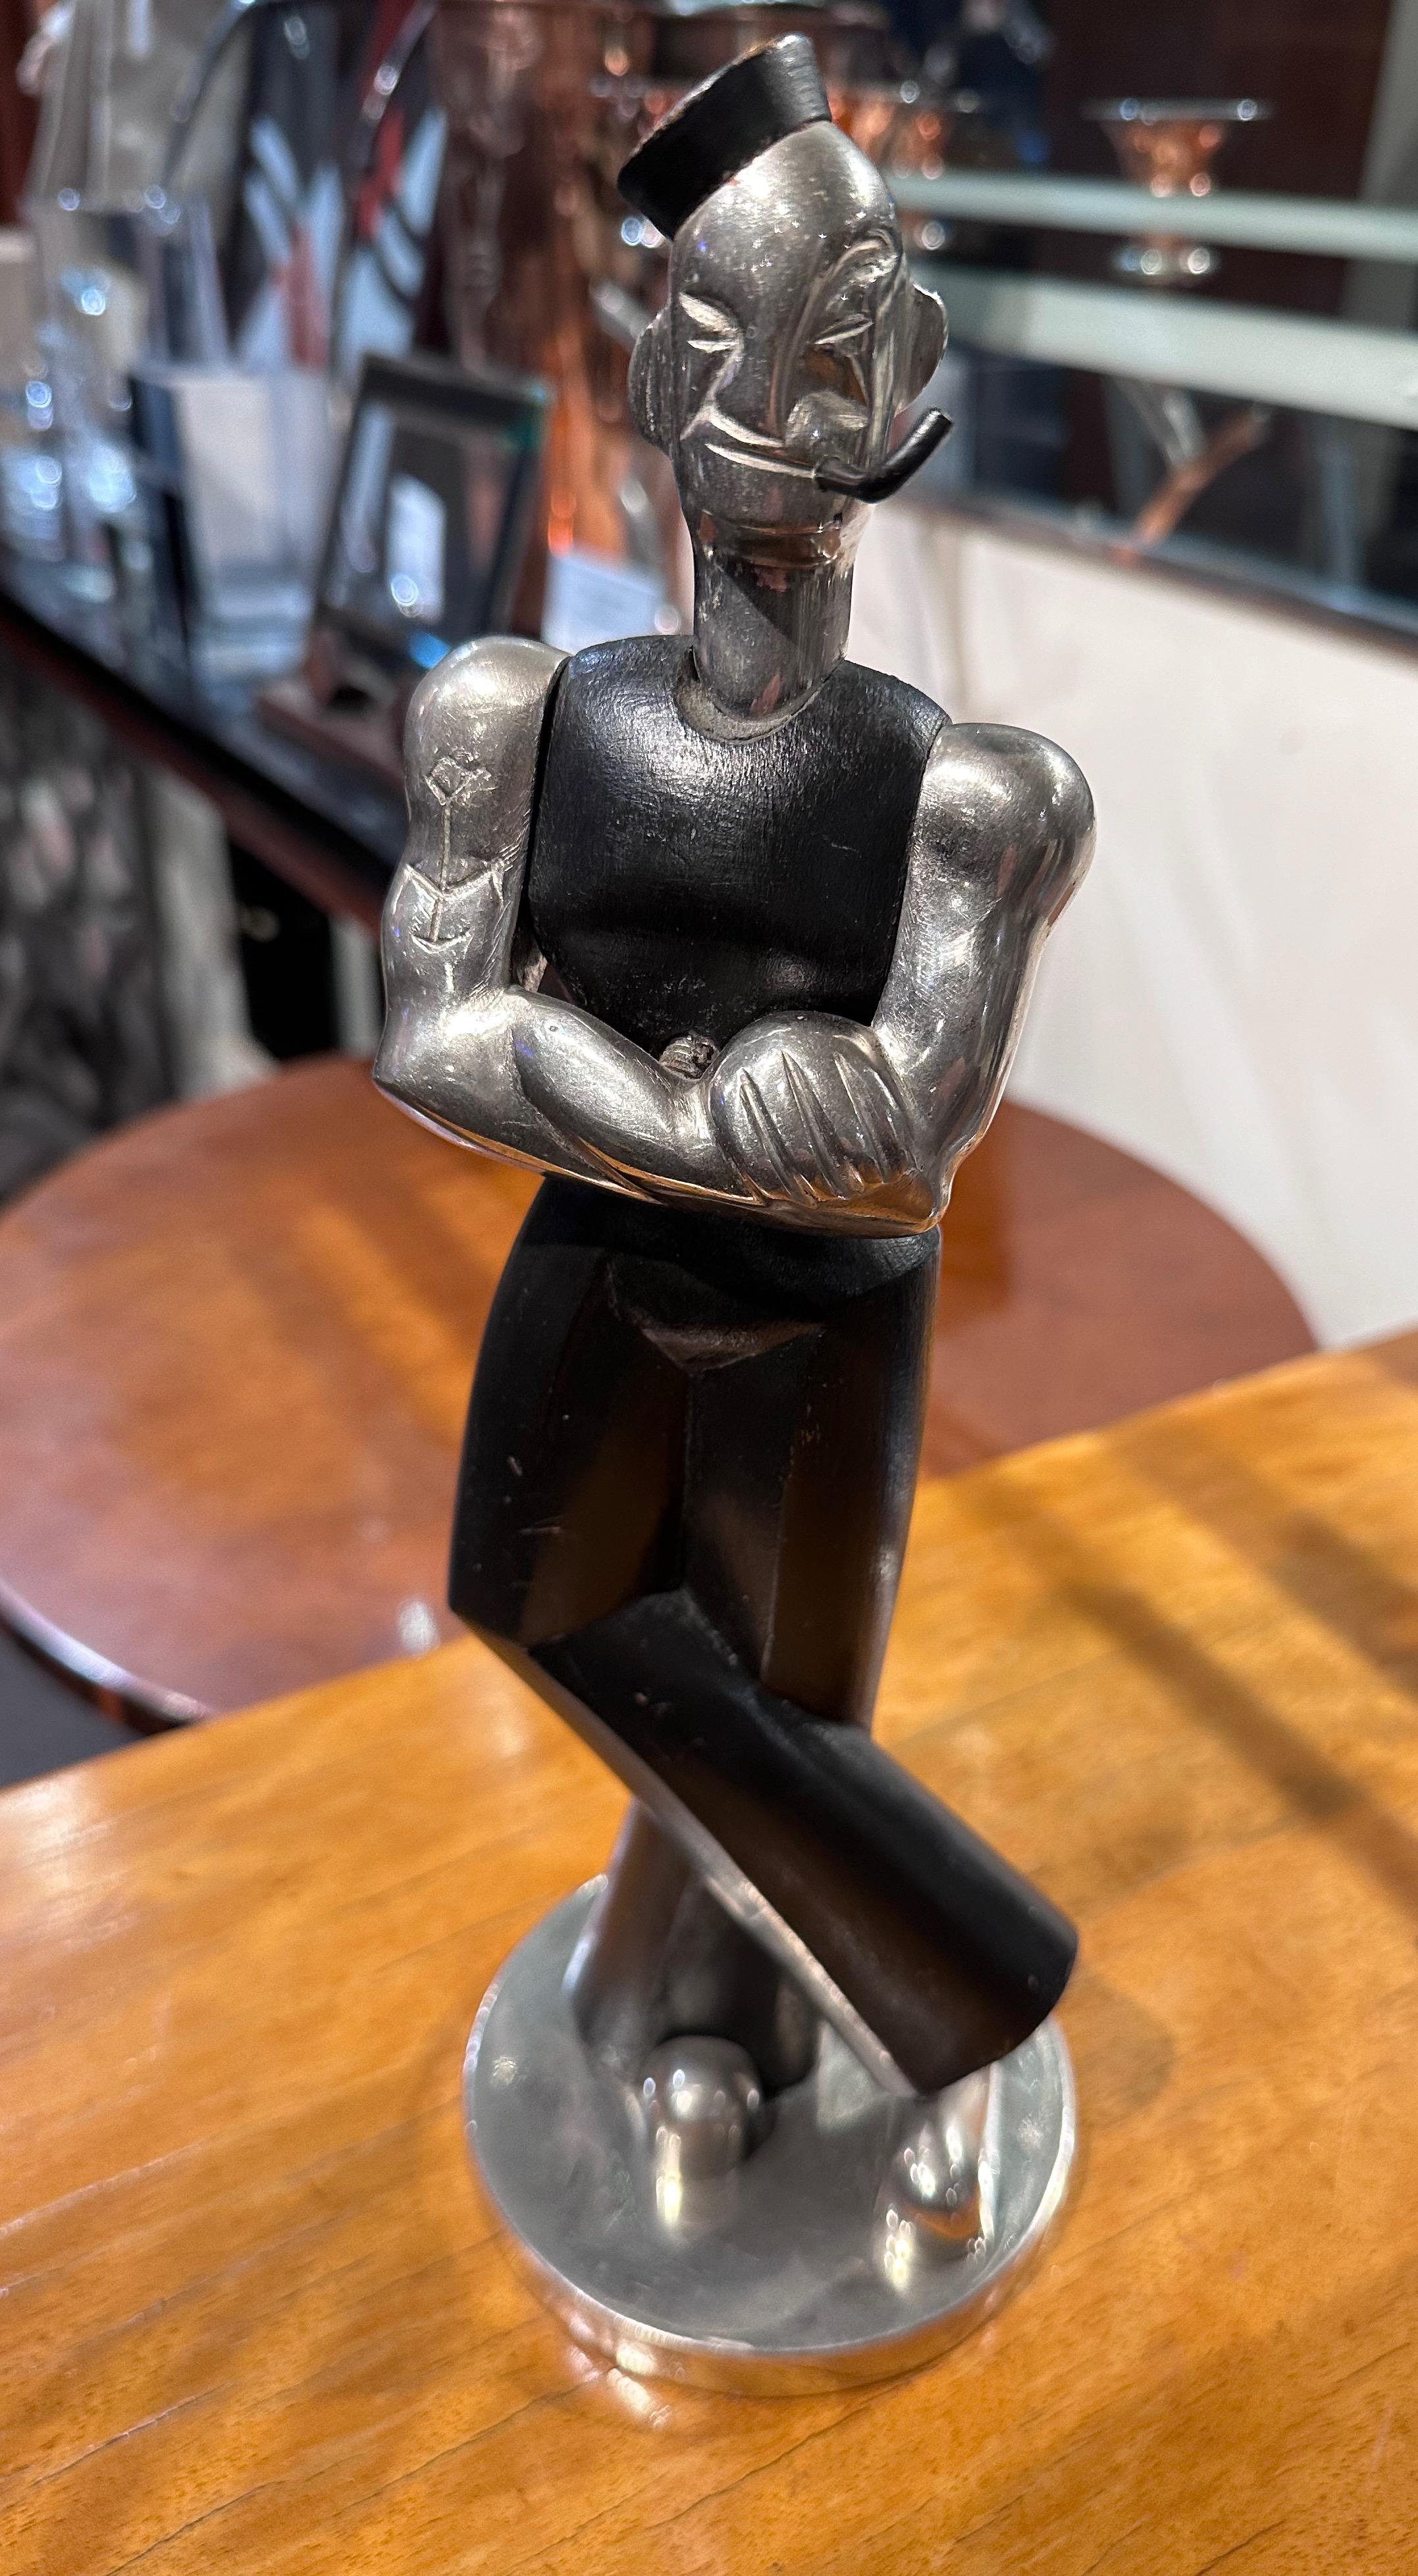 Popeye the Sailor, a European Sculpture in the style of Hagenauer made of Ebony wood and Metal in the Art Deco style. We have had a few pieces in this treatment, style and materials. They are very rare to find. This one is particularly interesting